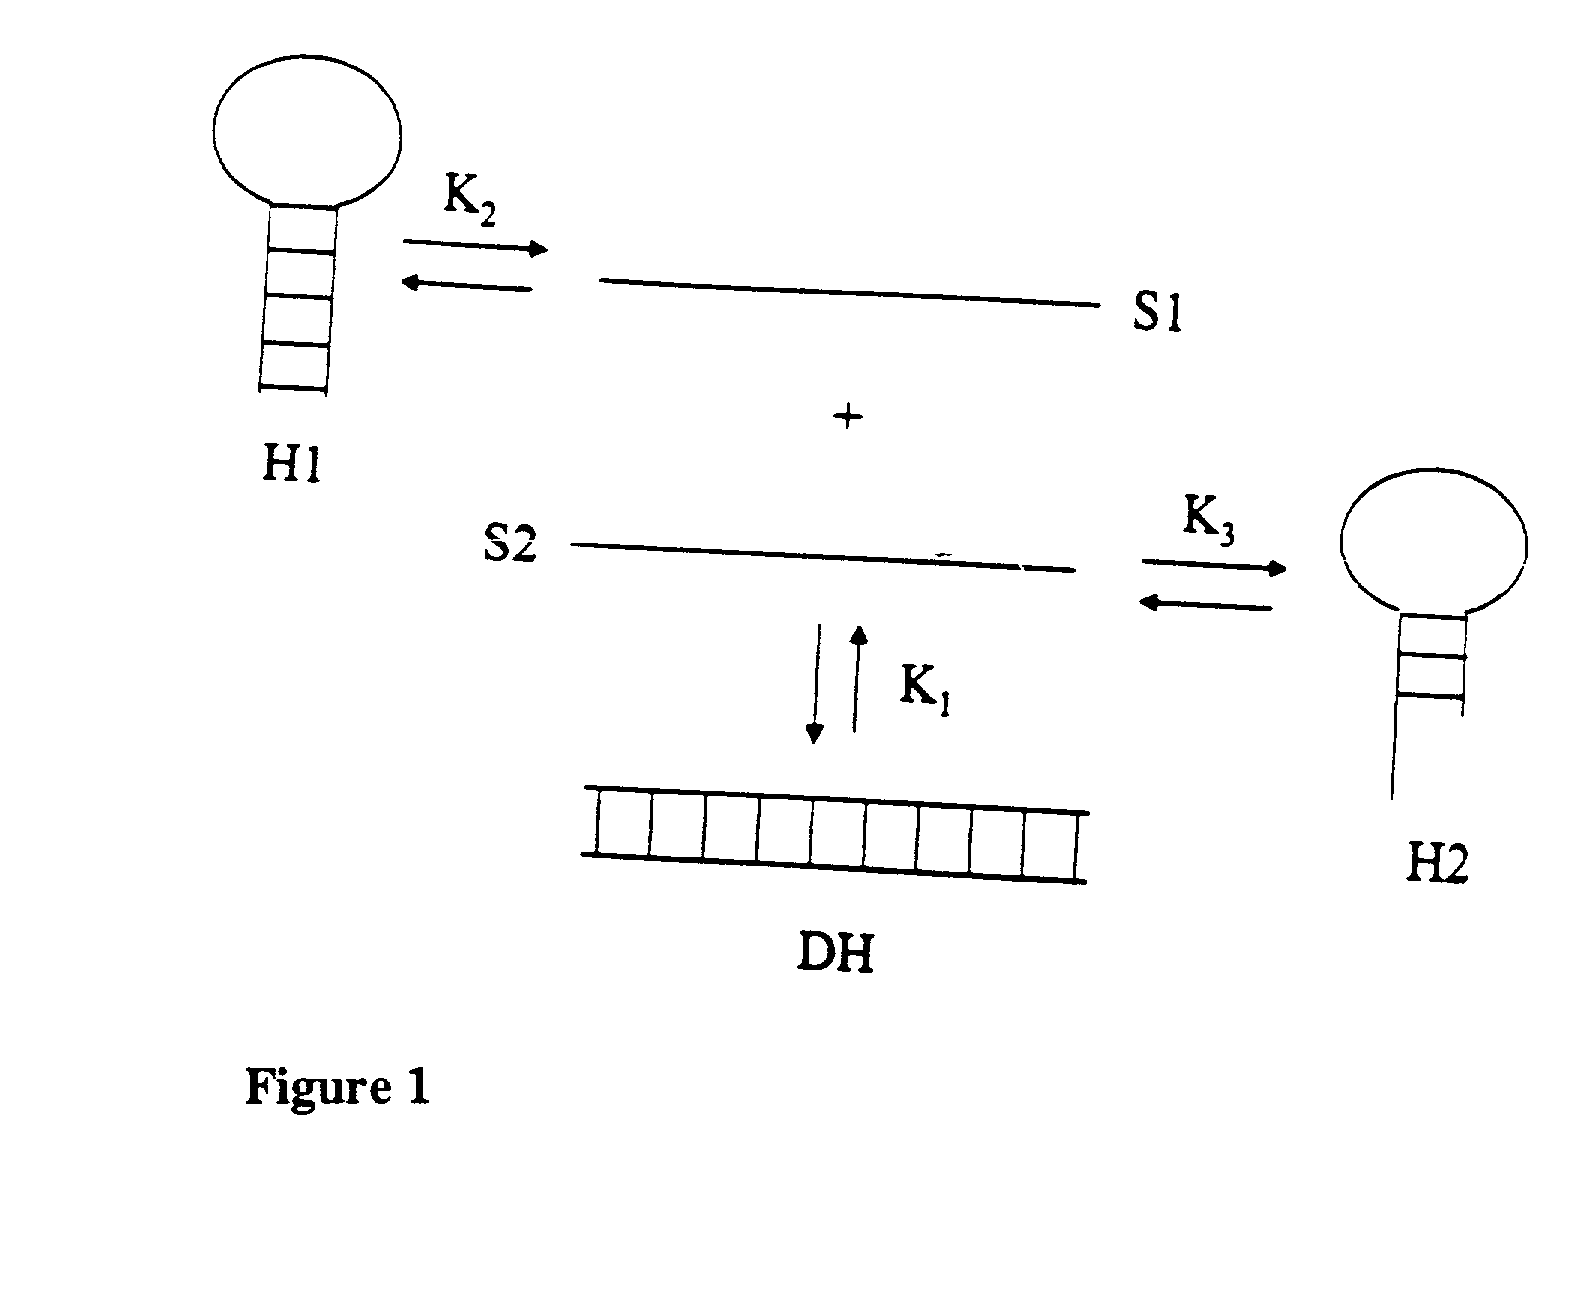 Method and system for predicting nucleic acid hybridization thermodynamics and computer-readable storage medium for use therein